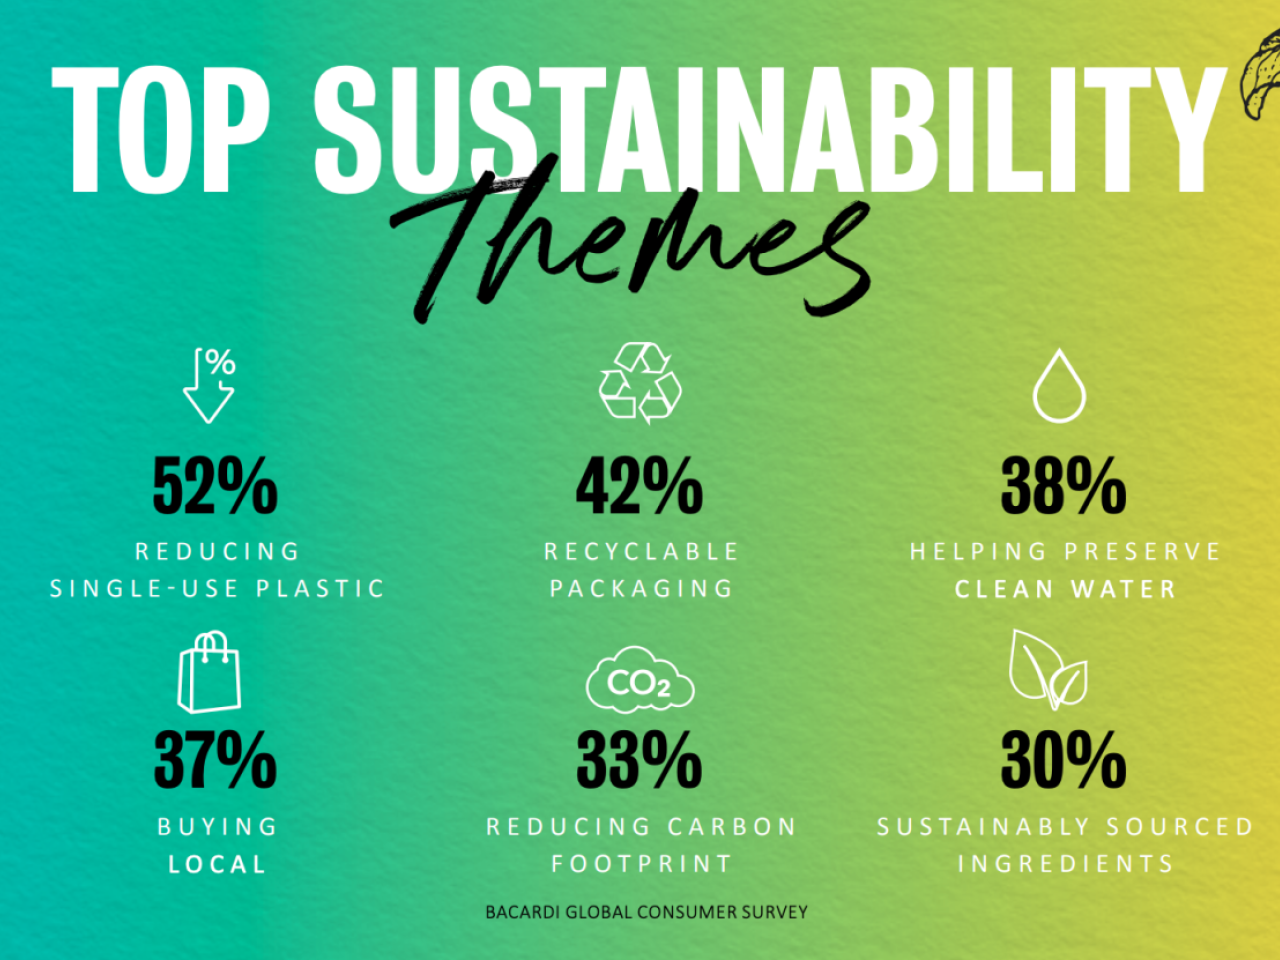 Top Sustainability Themes